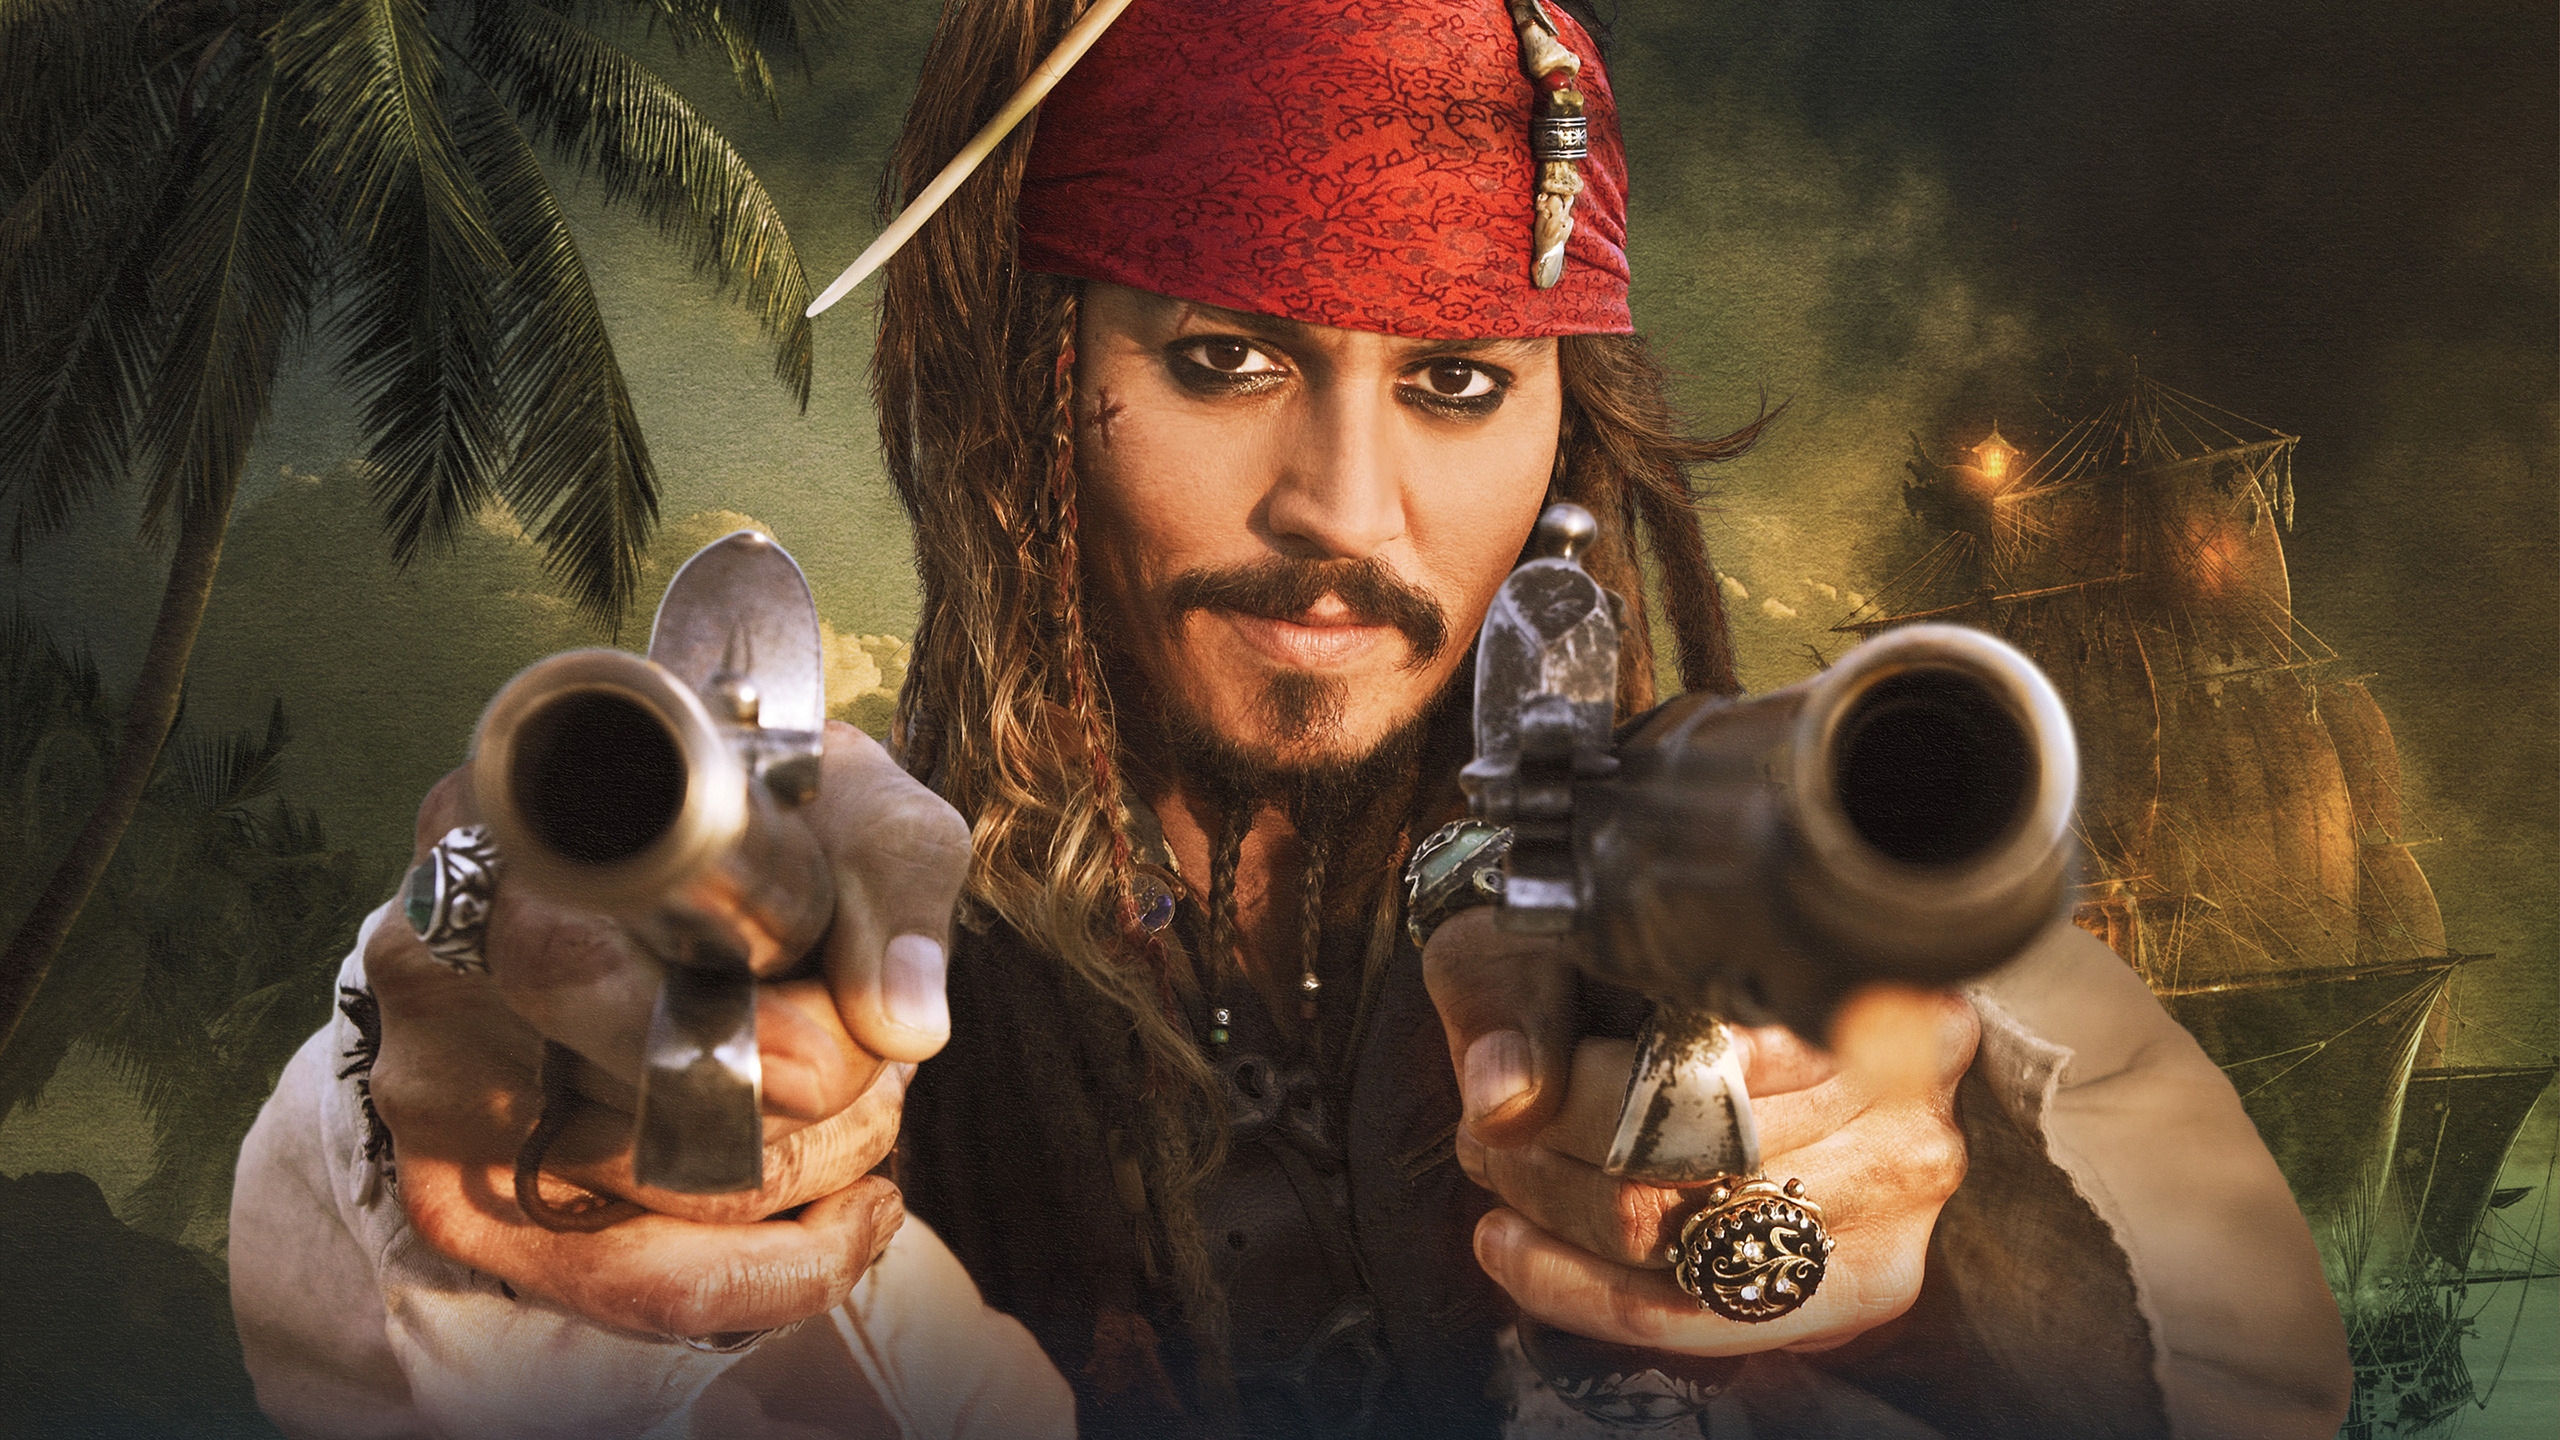 Jack Sparrow for 2560x1440 HDTV resolution